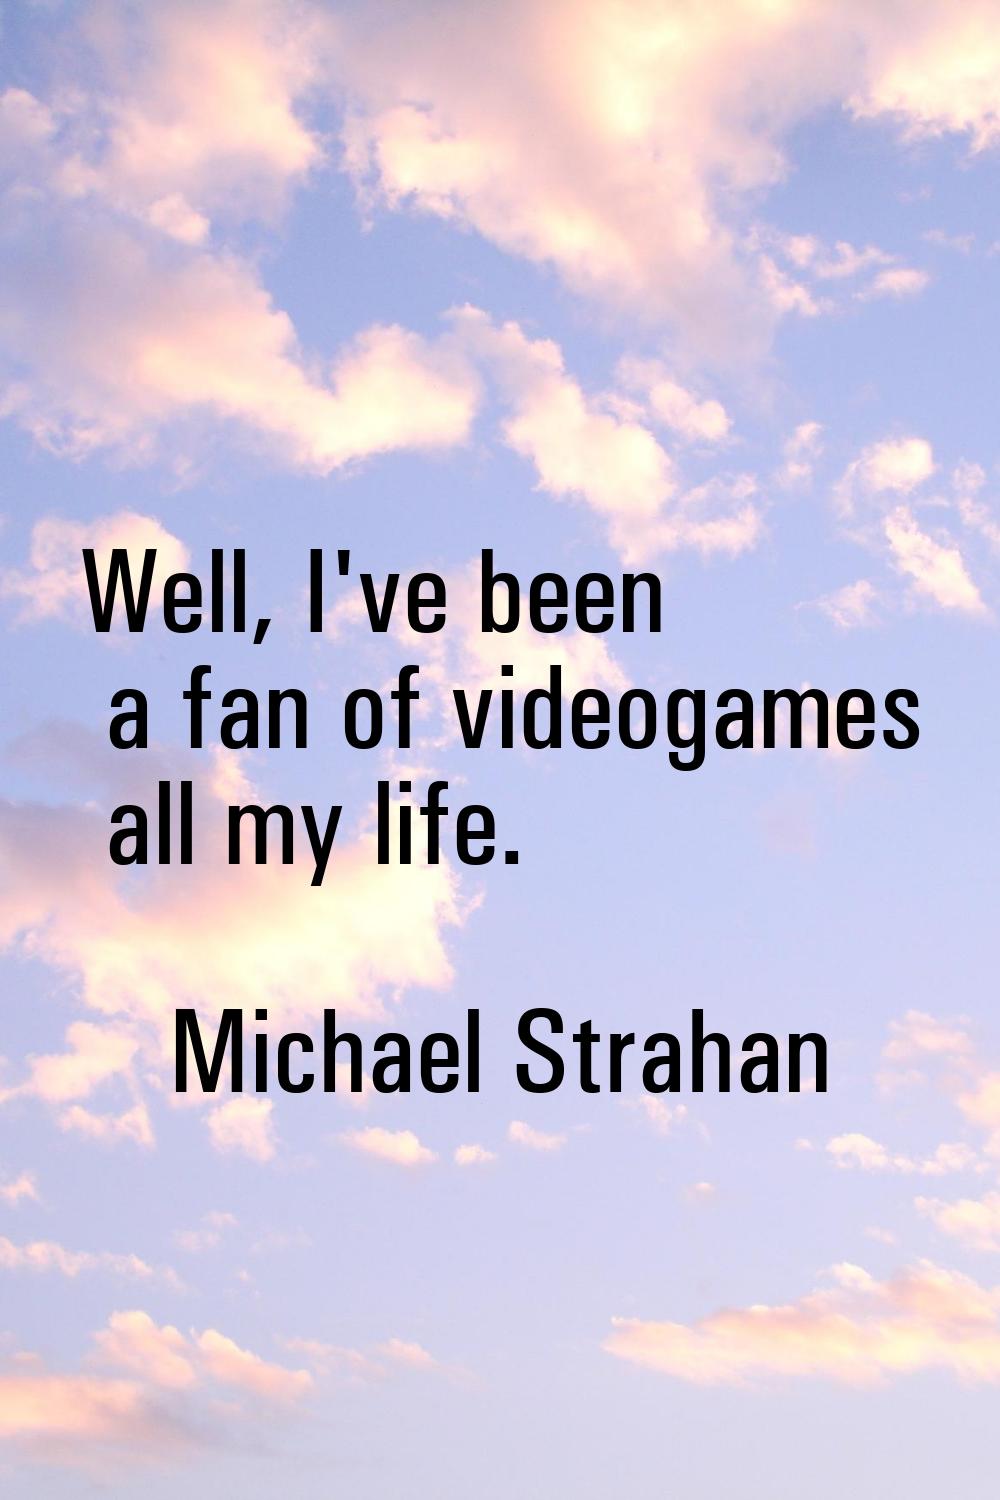 Well, I've been a fan of videogames all my life.